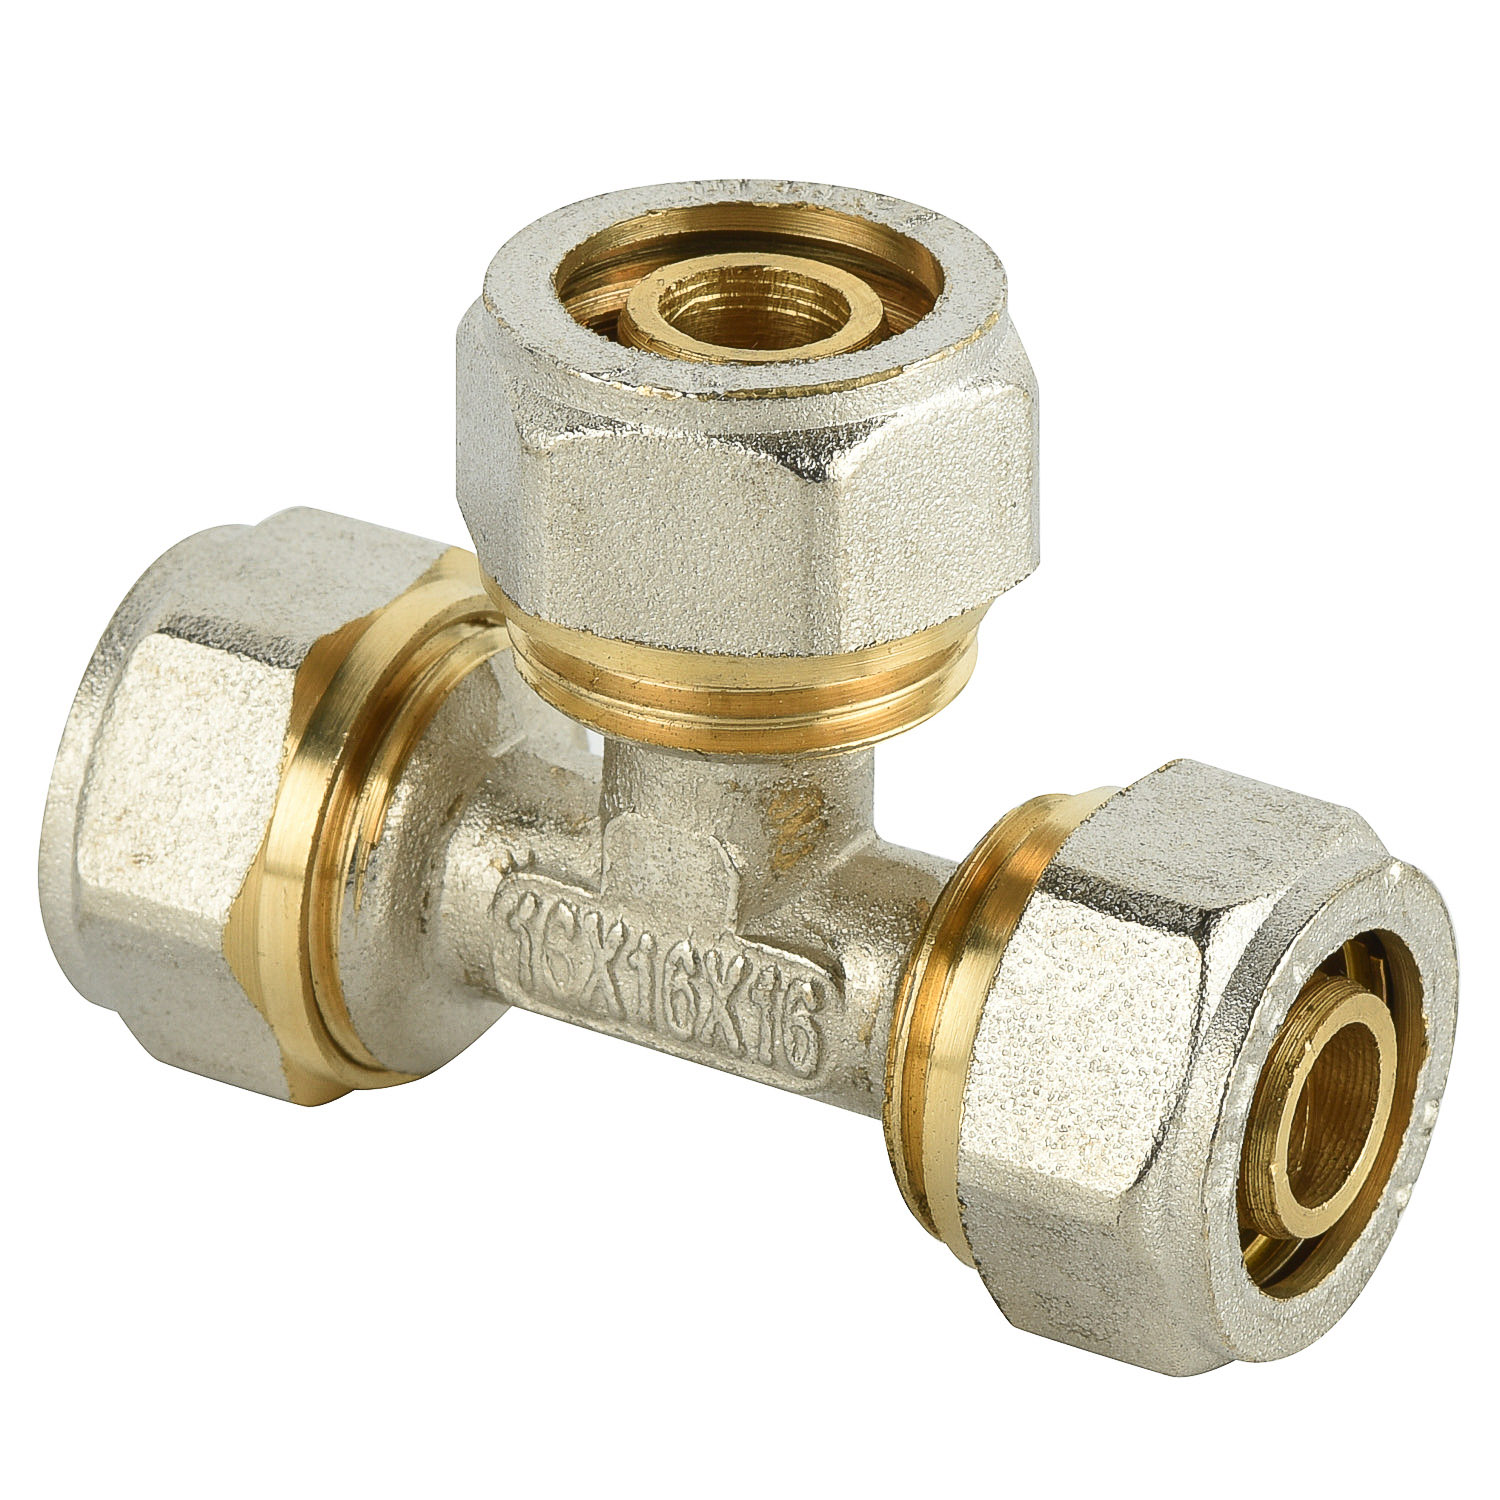 Home / Office Brass Compression Pipe Fittings Online Technical Support